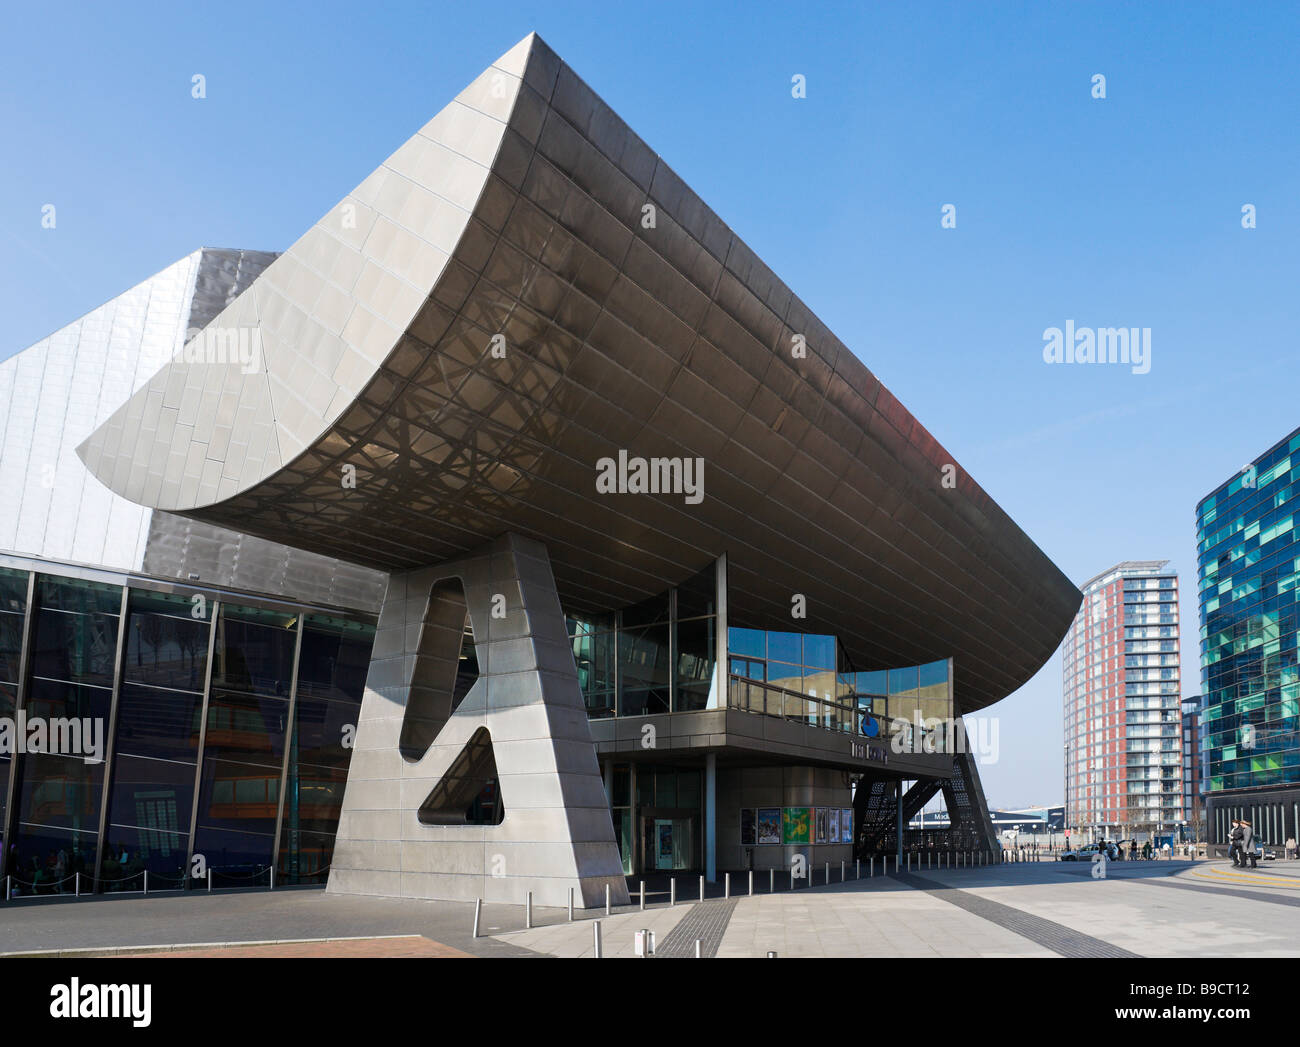 The Lowry Art Gallery and entertainment complex, Salford Quays, Greater Manchester, England Stock Photo